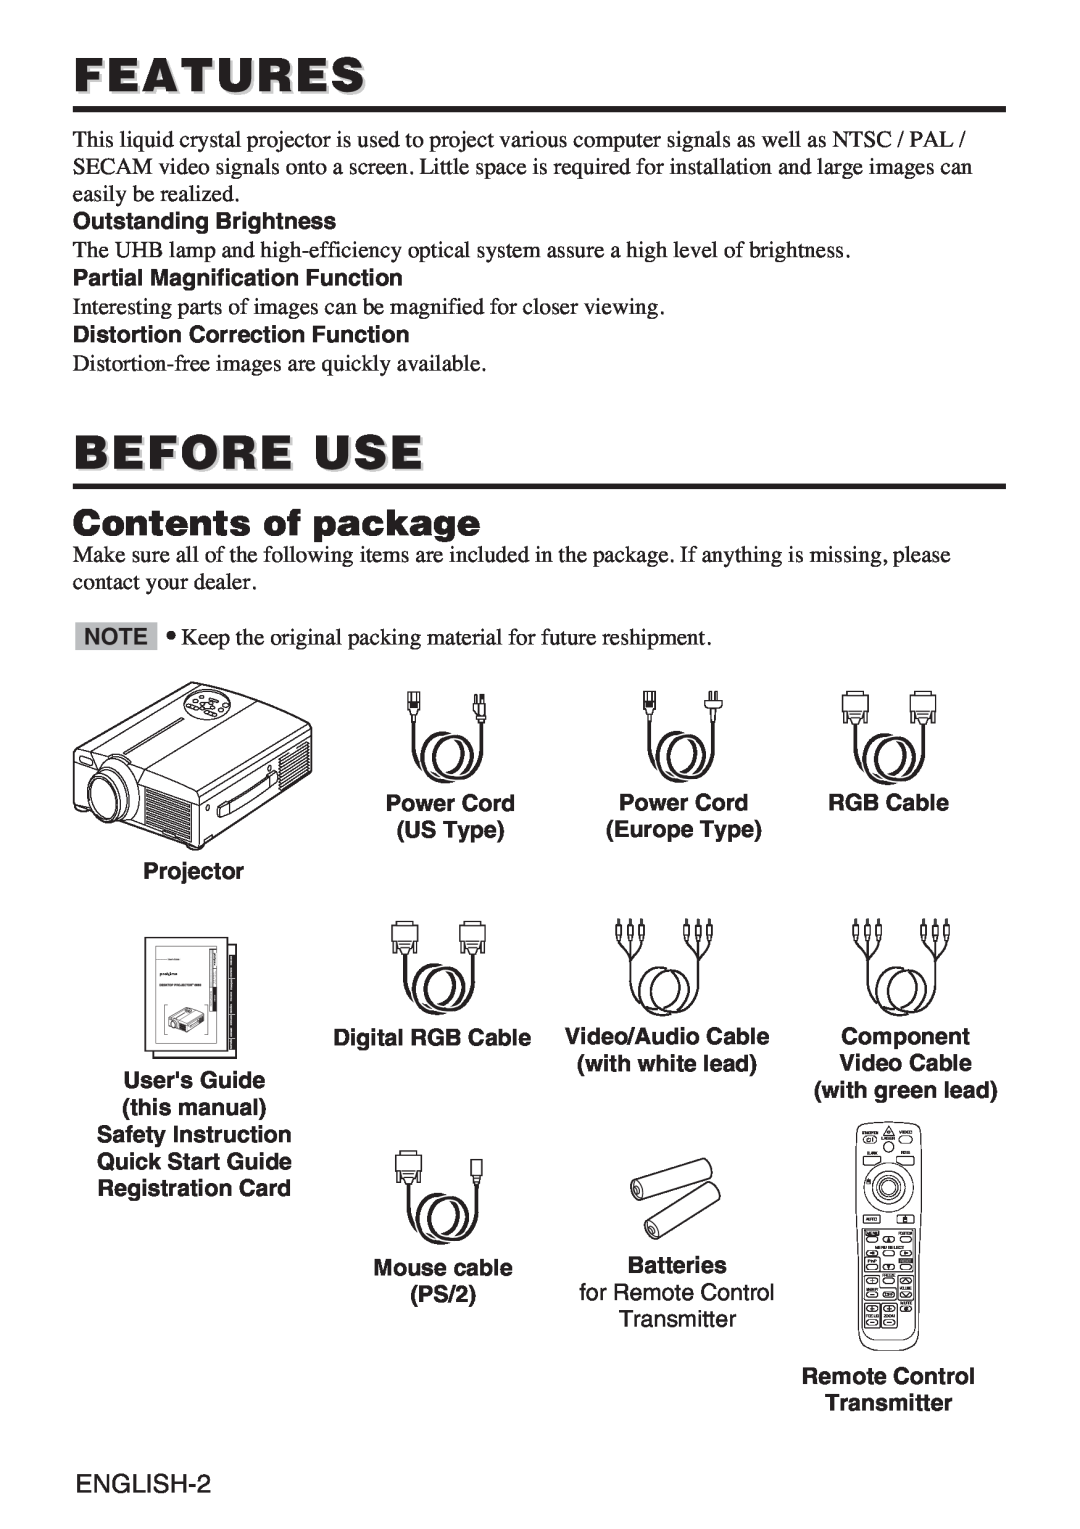 InFocus liquid crystal user manual Features, Before Use, Contents of package, ENGLISH-2 